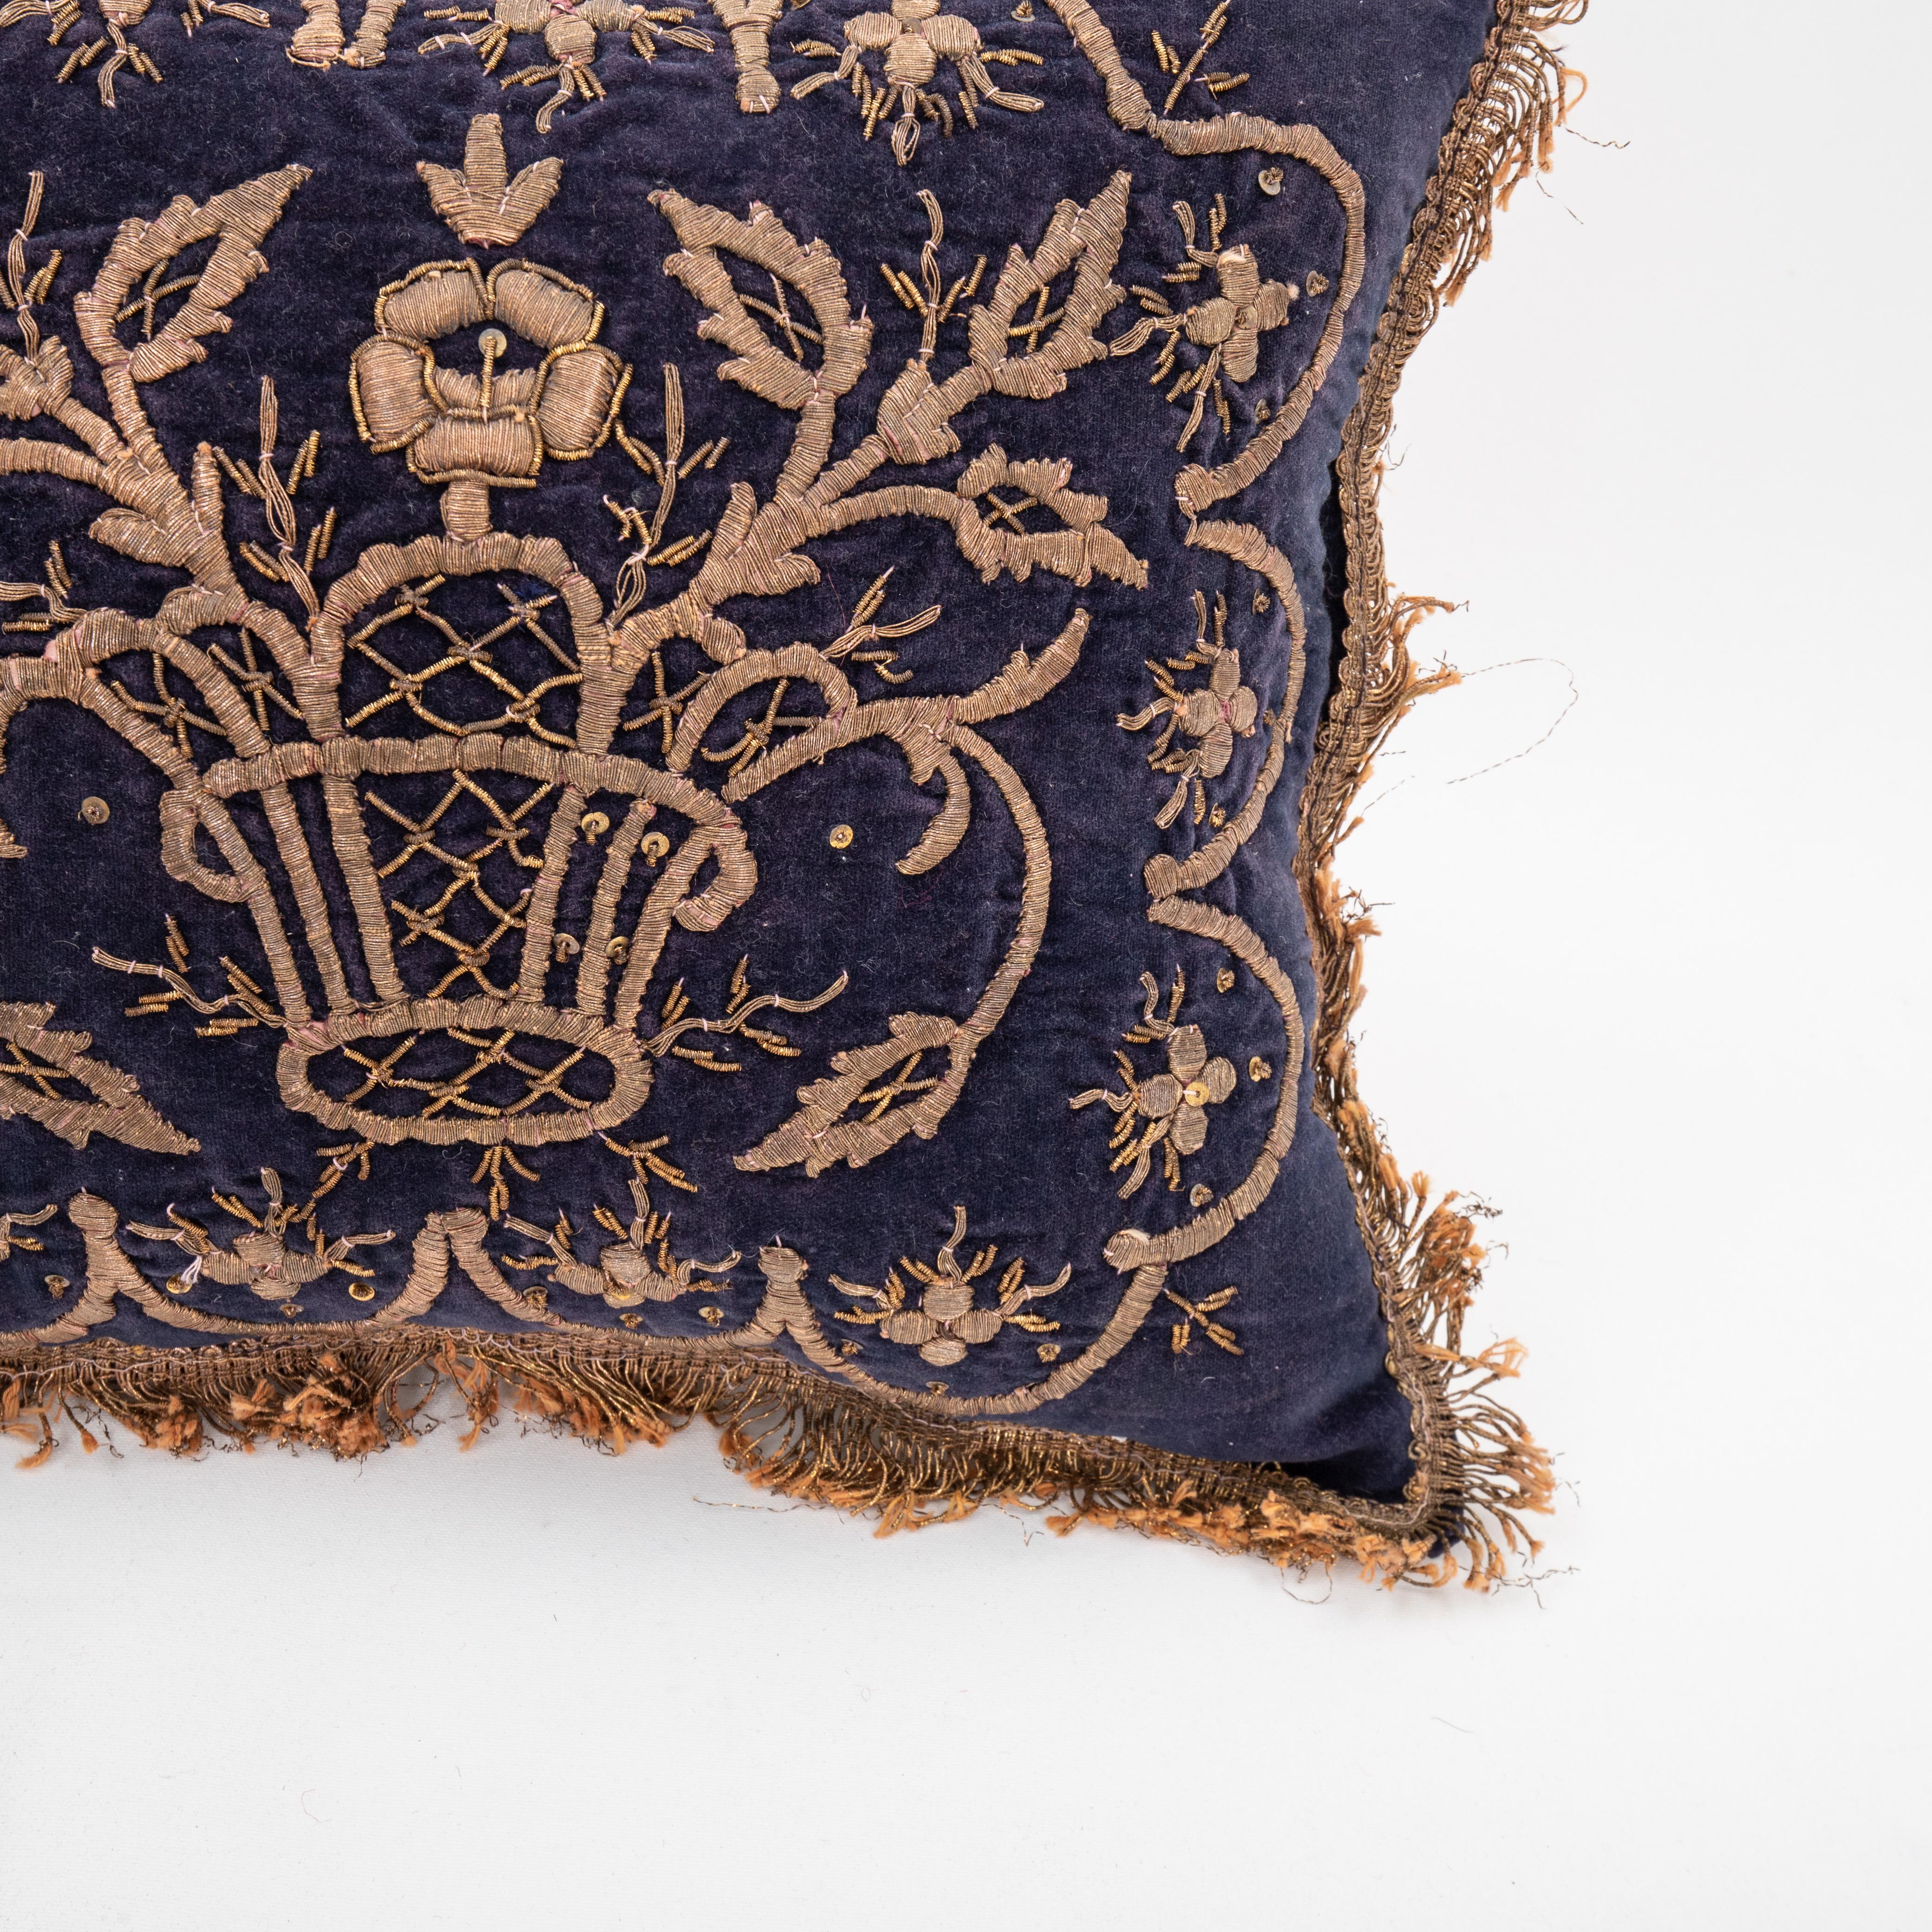 Metallic Thread Ottoman / Turkish Pillow Cover in Sarma Technique, late 19th / Early 20th C. For Sale